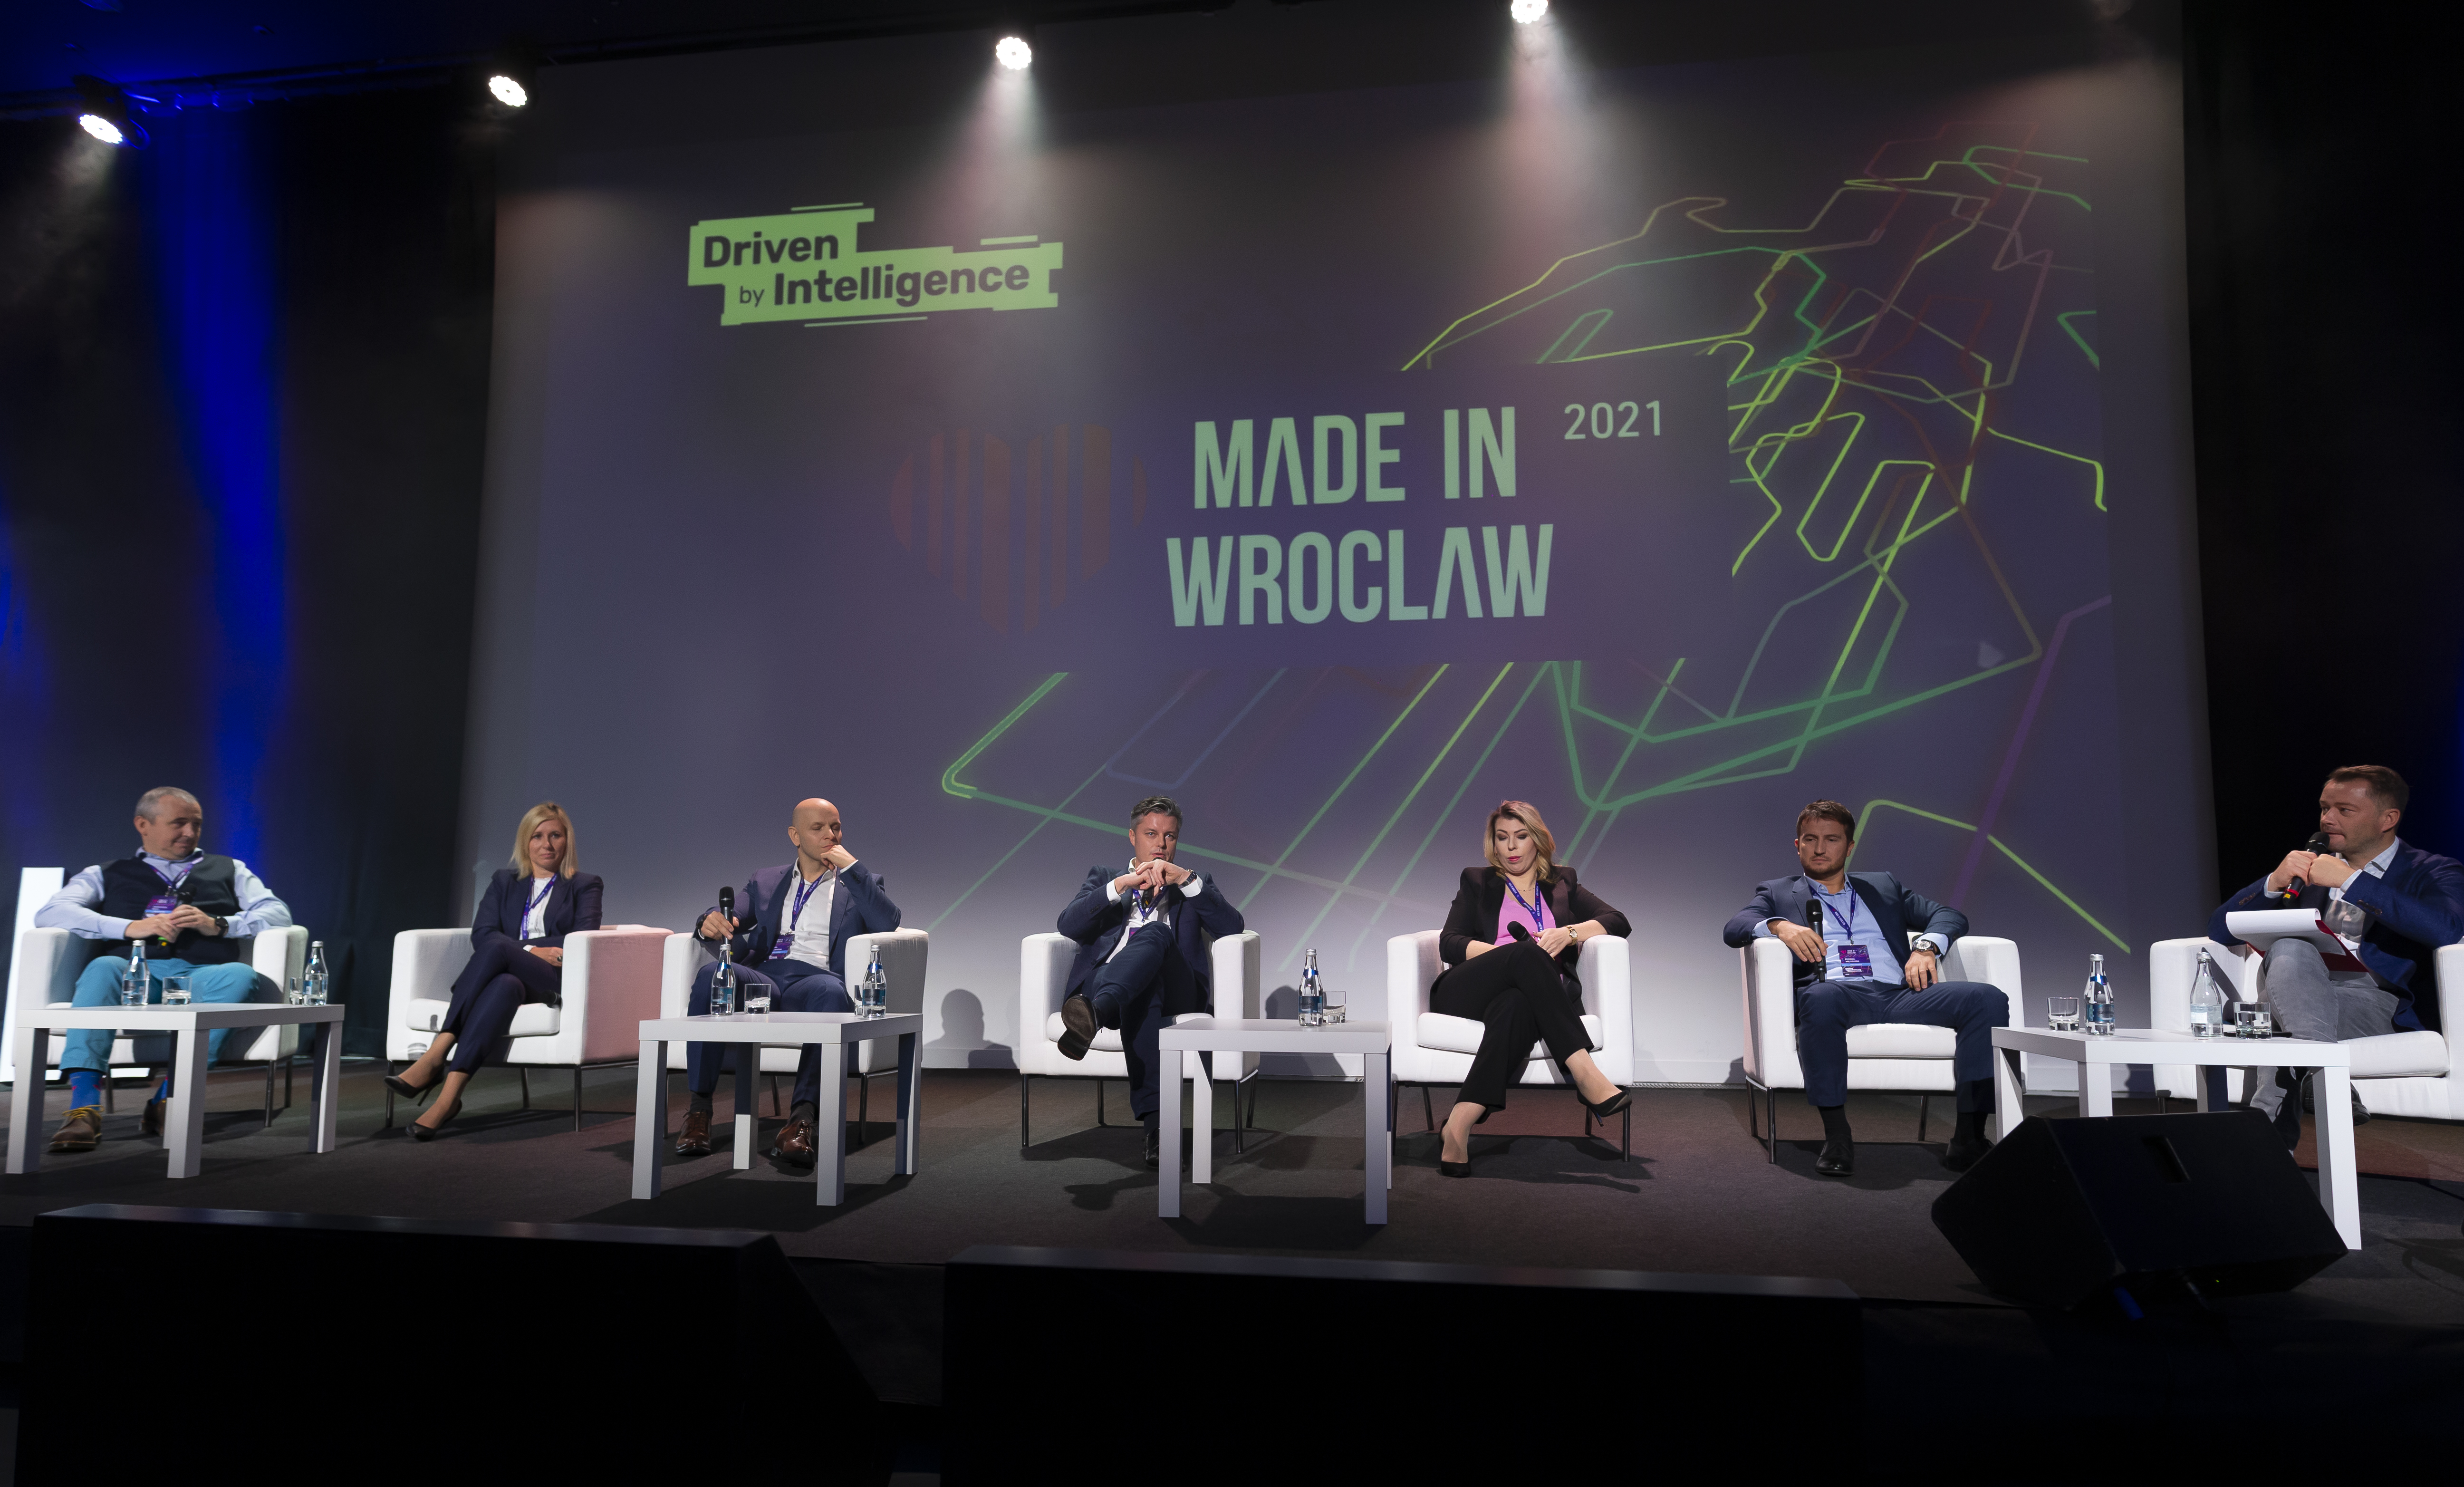 What does the future bring? Find out during Made in Wroclaw 2022 in Wroclaw